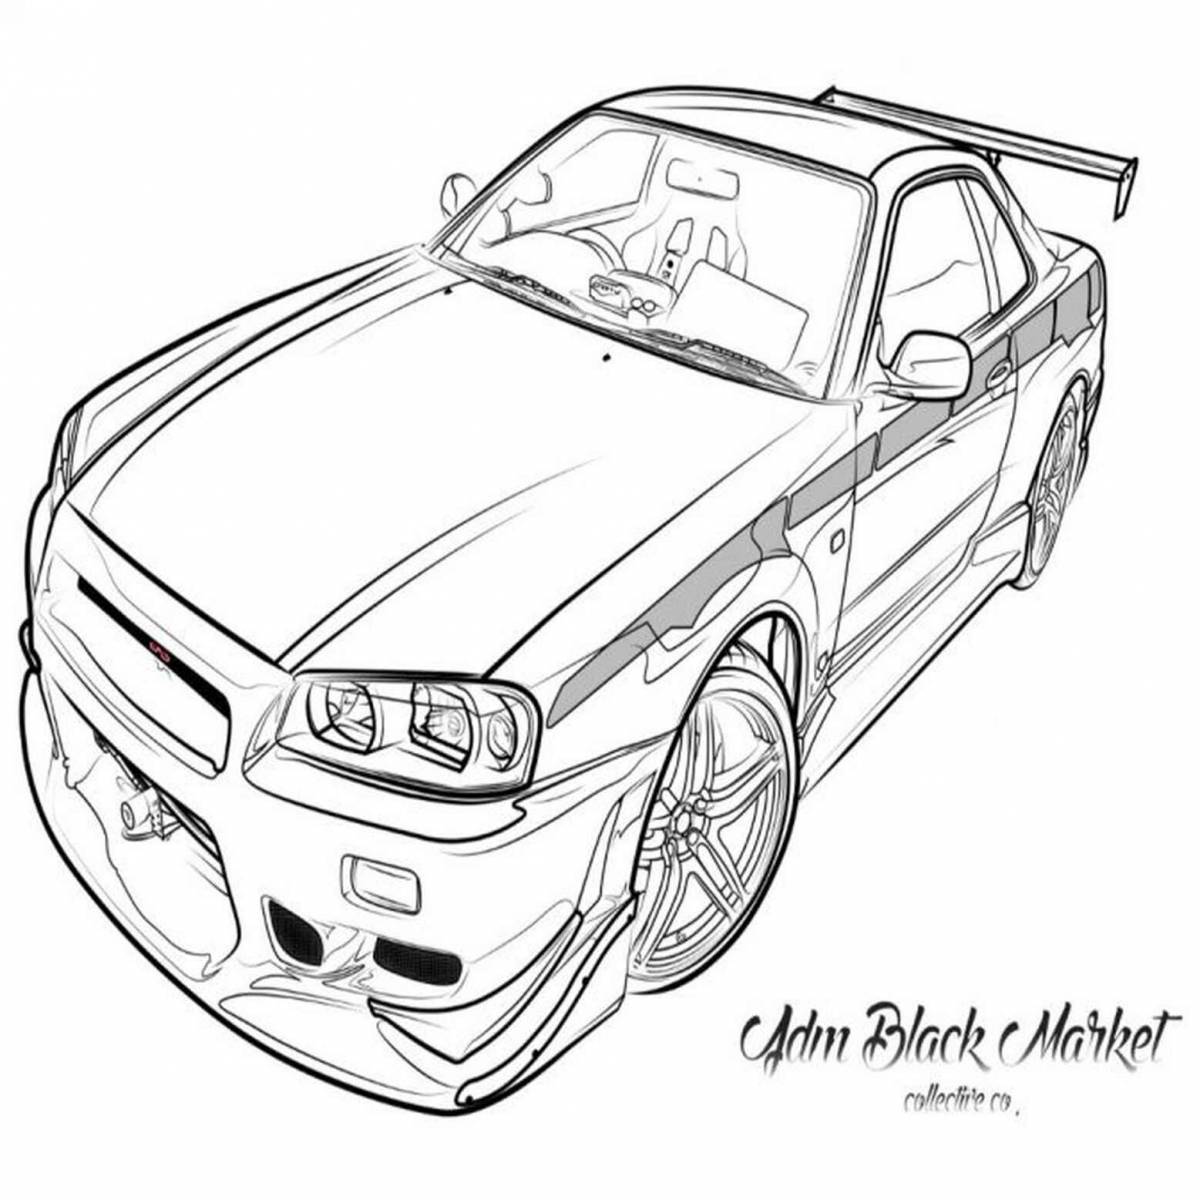 Colorful nissan skyline coloring page